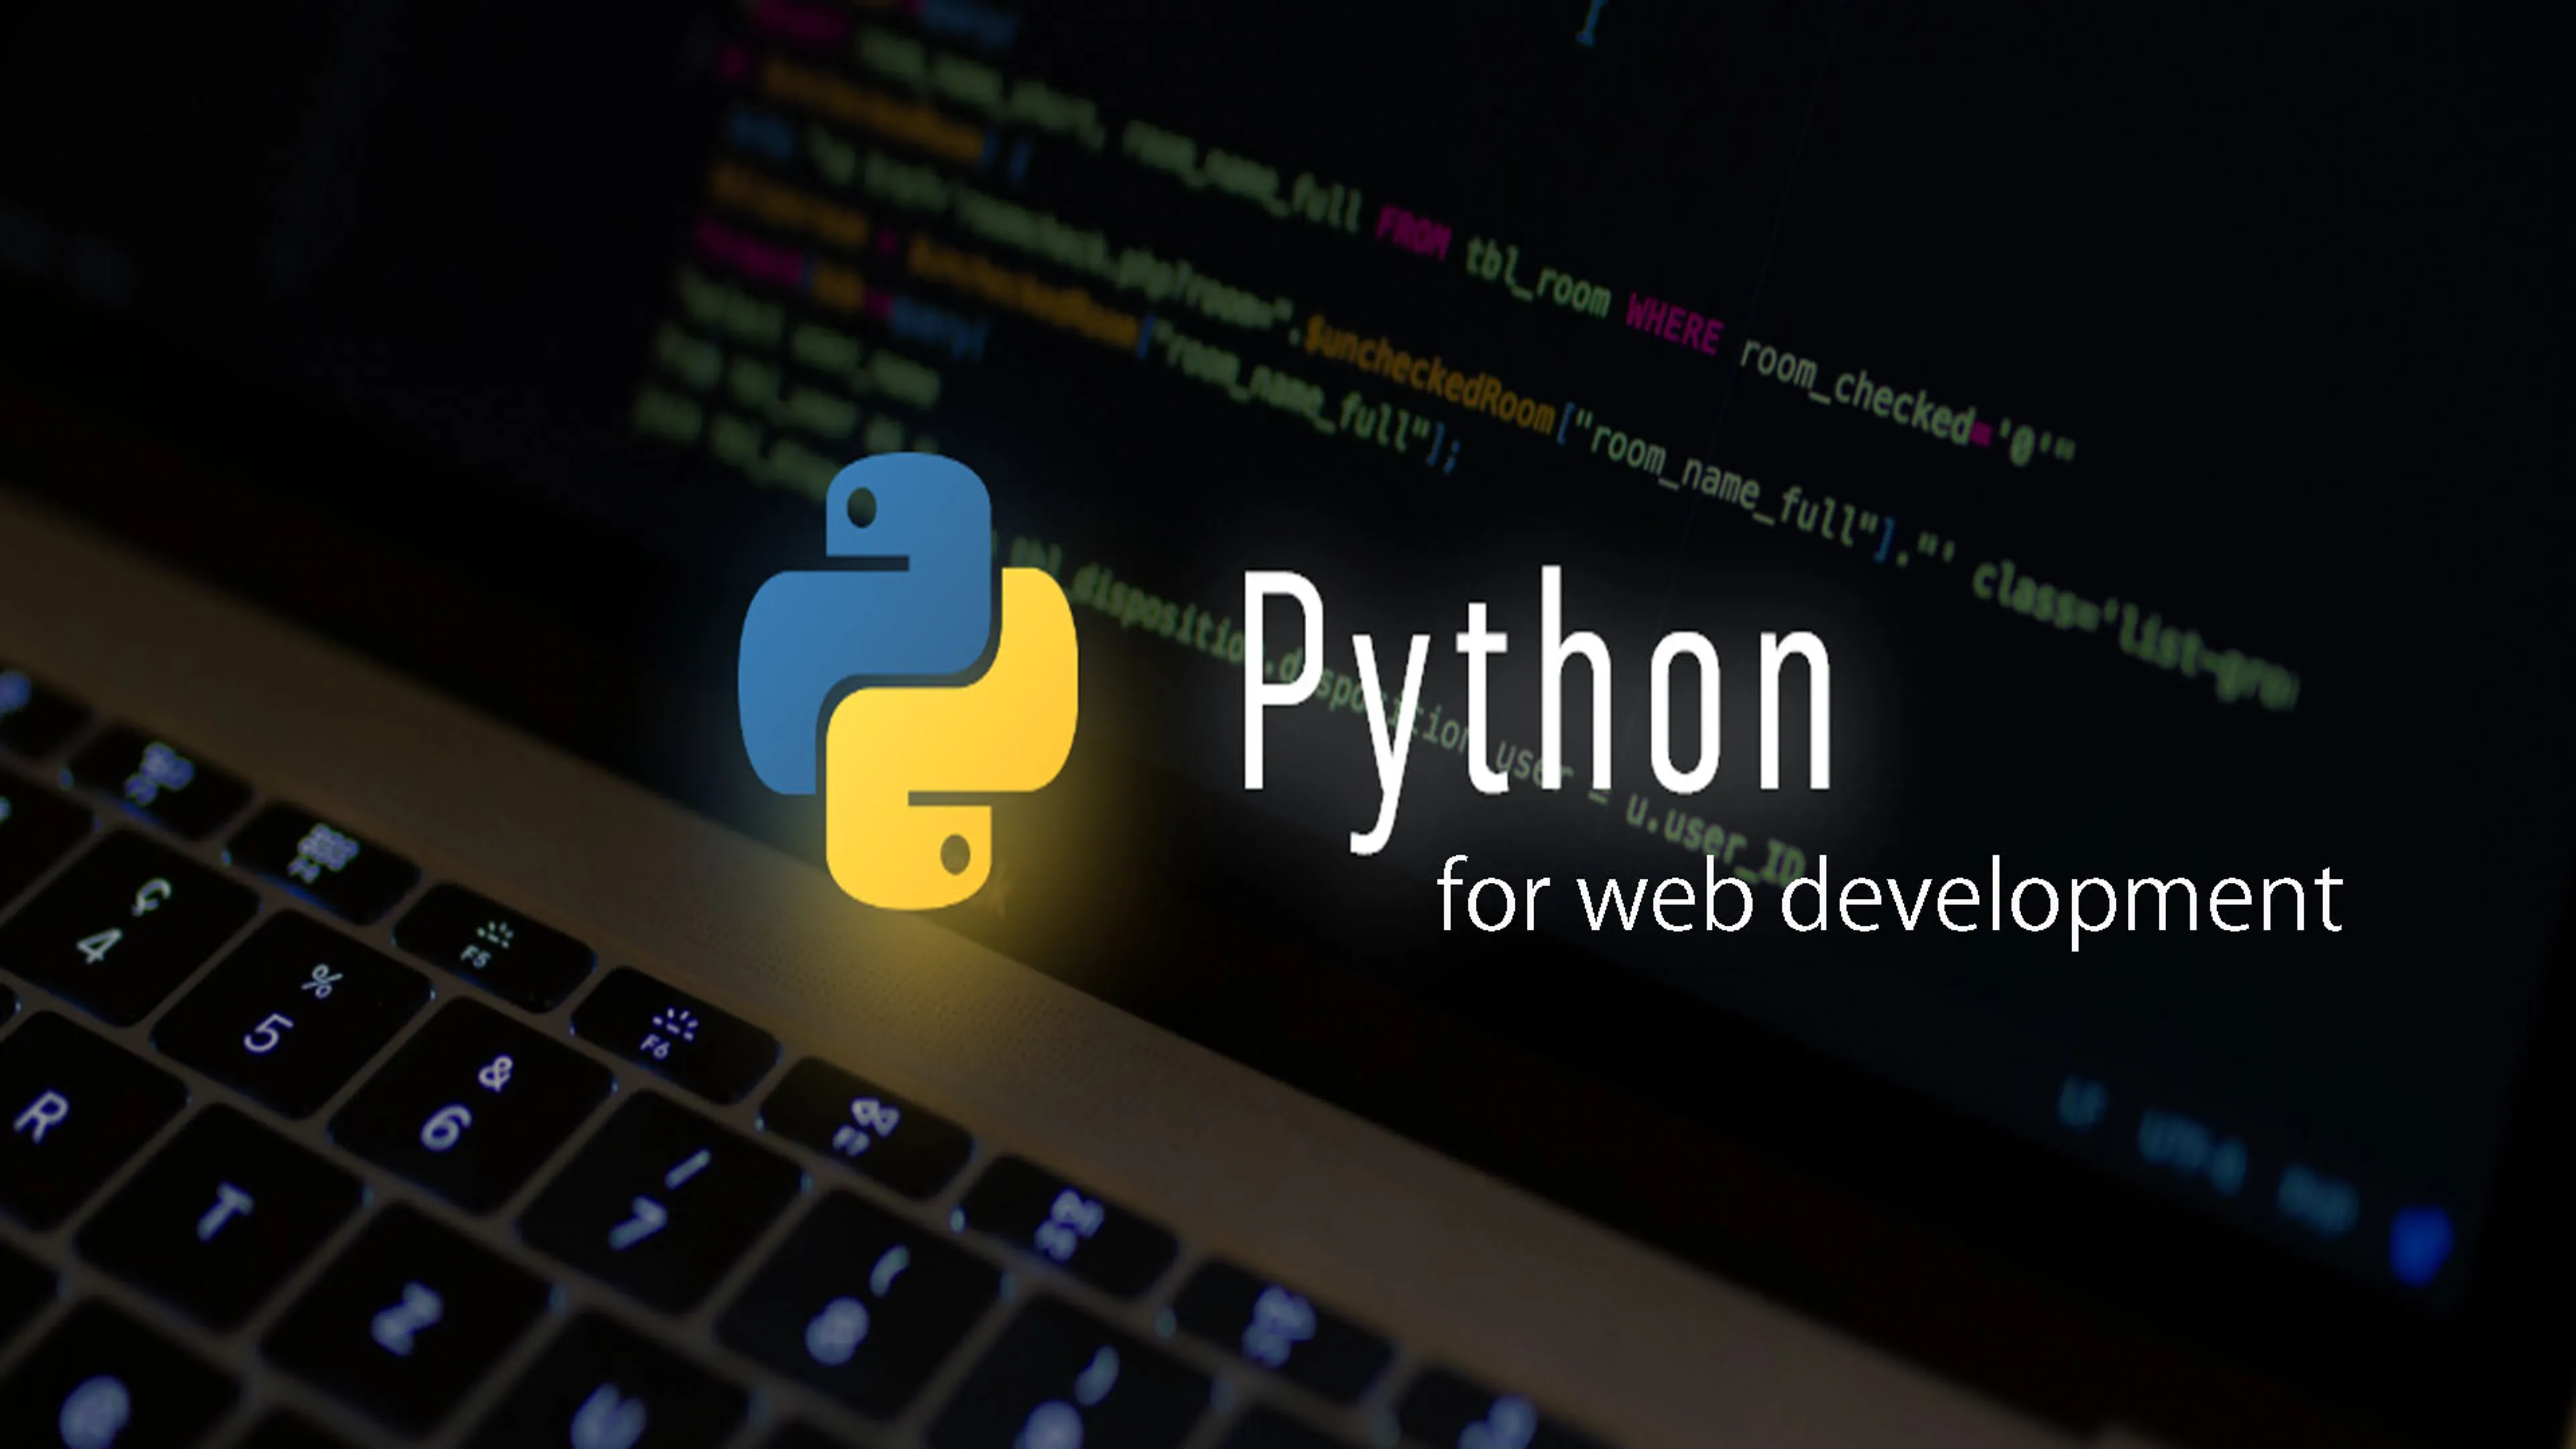 The Power of Python: From Data Analysis to Web Development